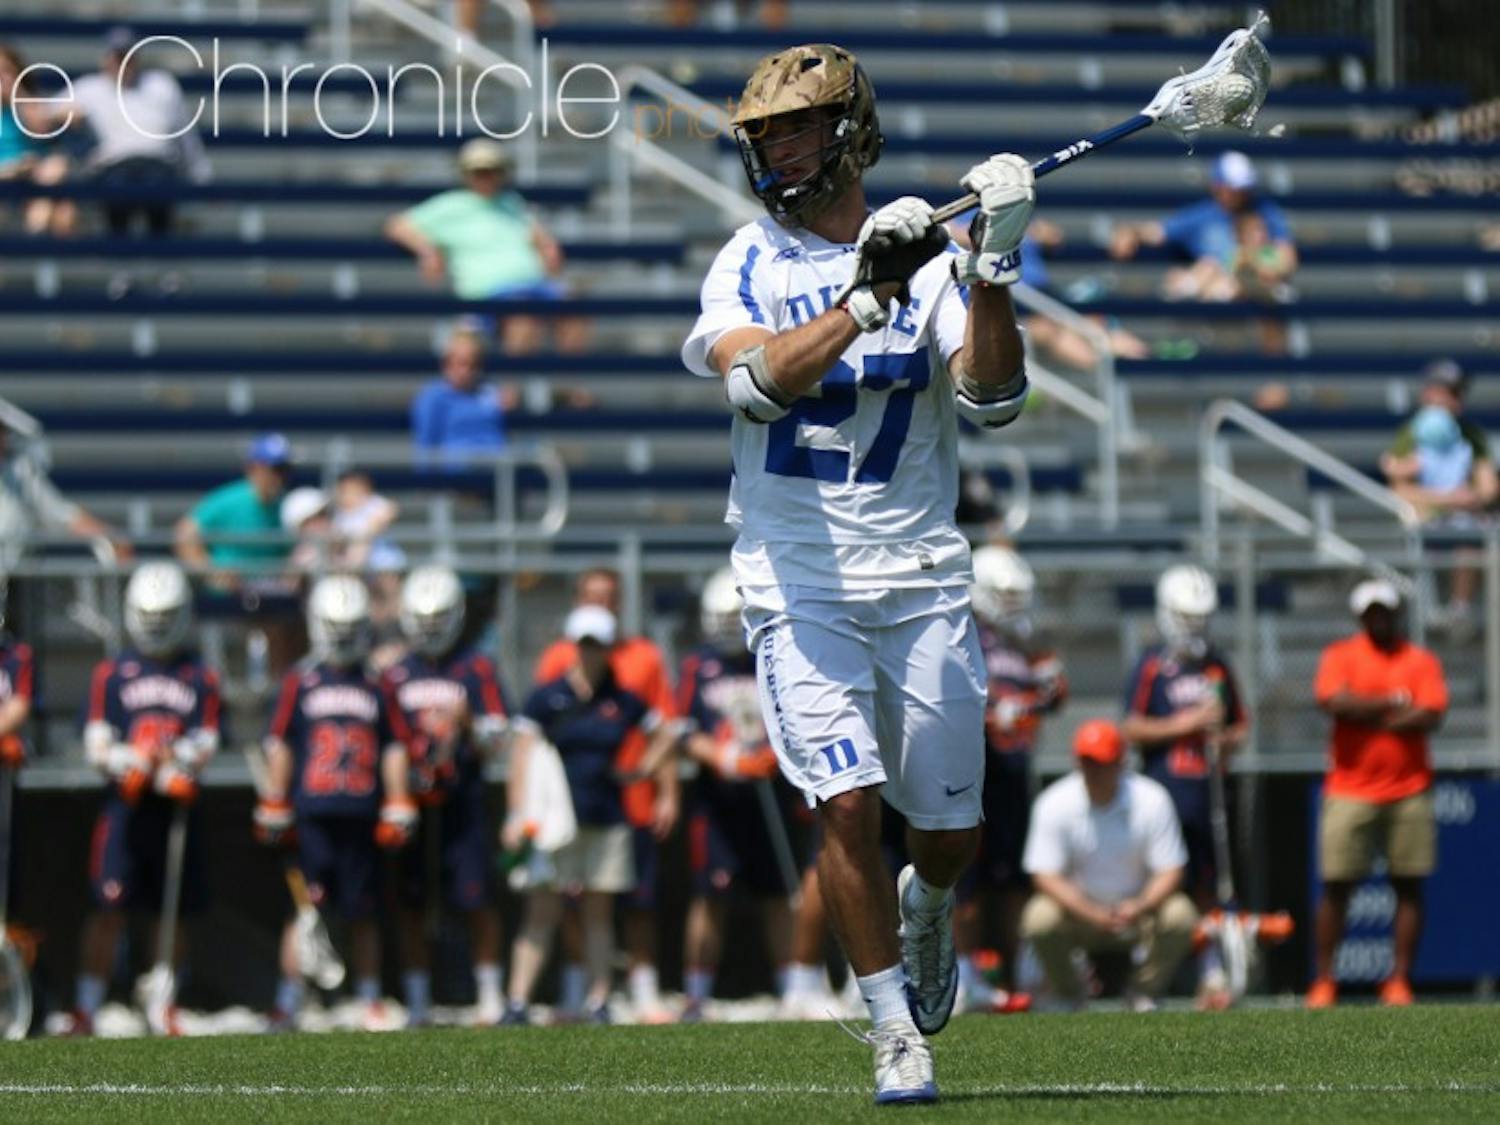 Sophomore midfielder Brad Smith is third on a stacked Blue Devil team in points with 13 goals and 15 assists.